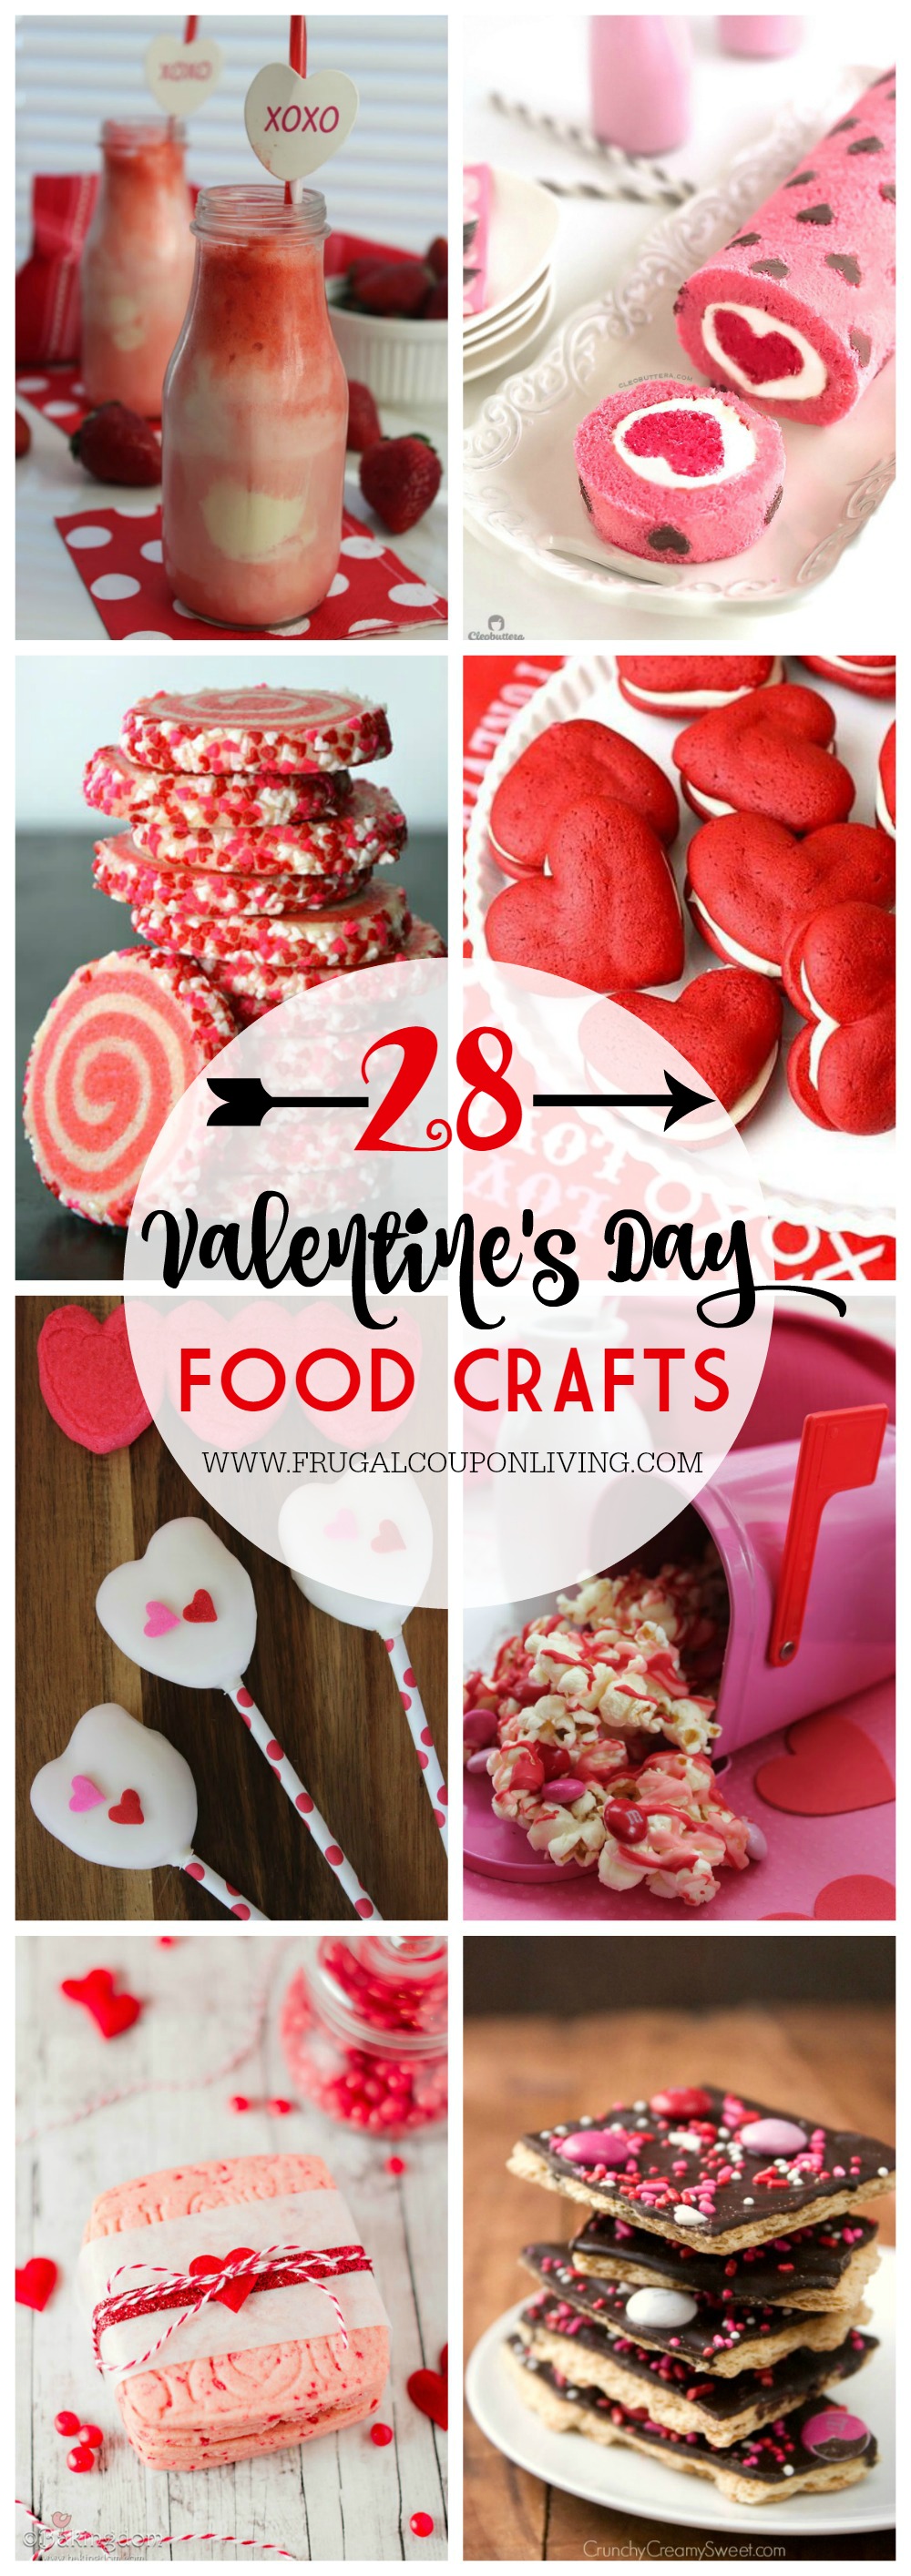 Valentines-Day-Food-Crafts-Frugal-Coupon-Living